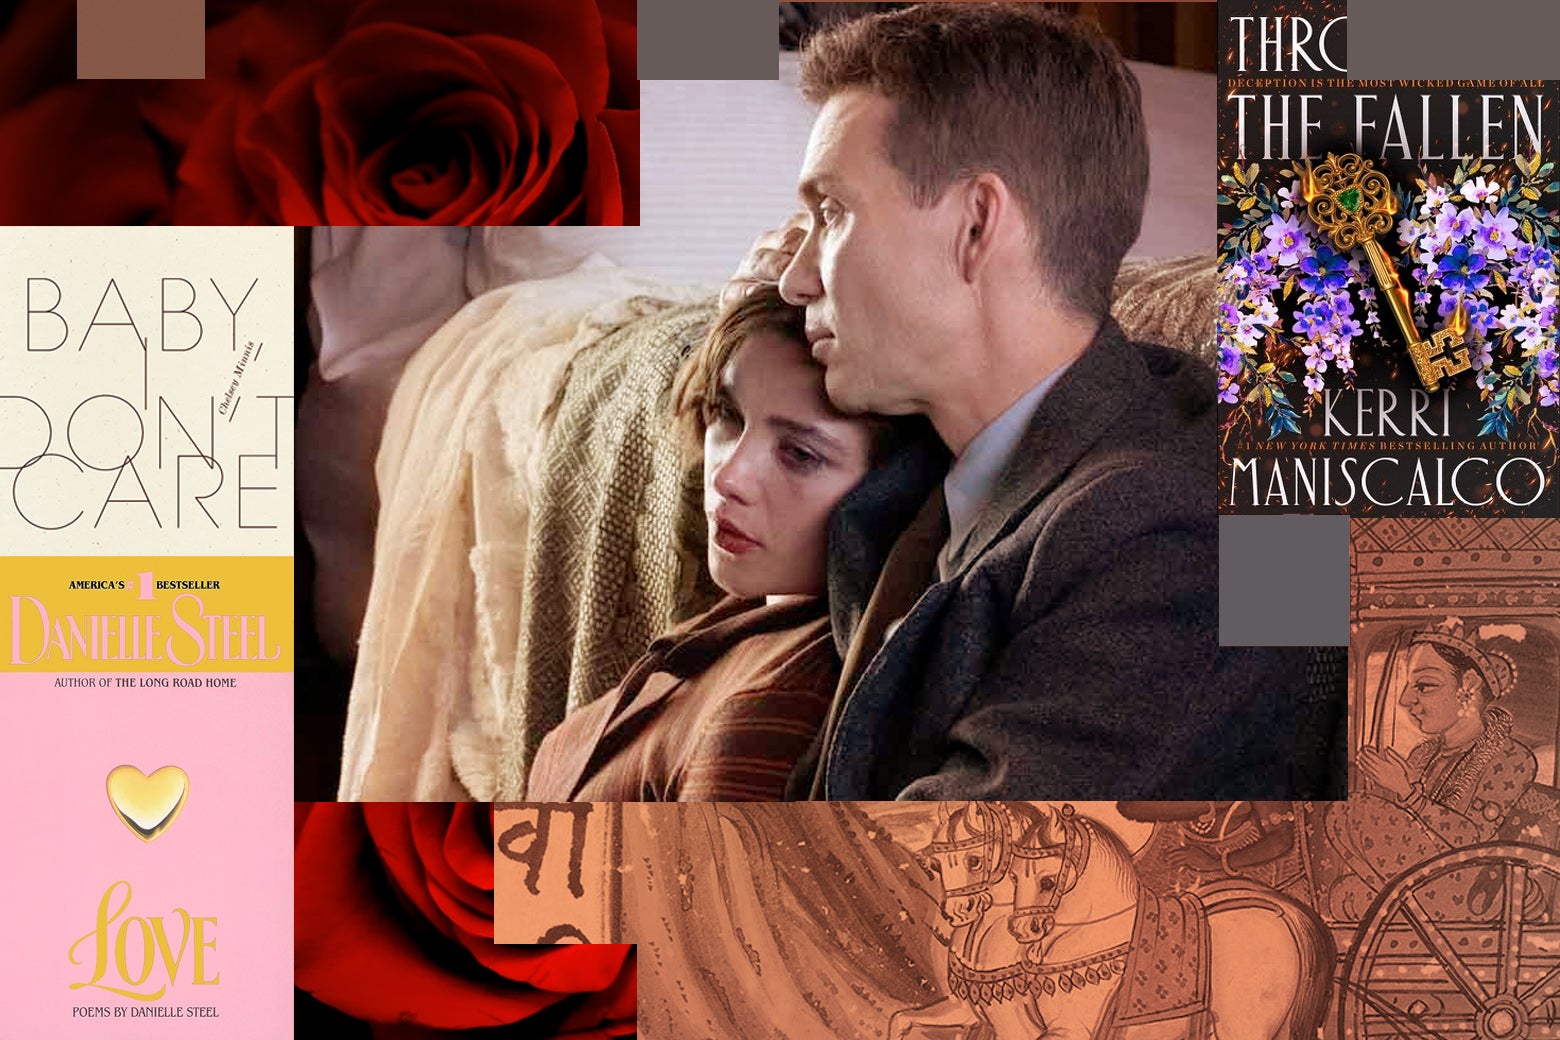 Collage showing Cillian Murphy and Florence Pugh in Oppenheimer, with images of book covers and roses.